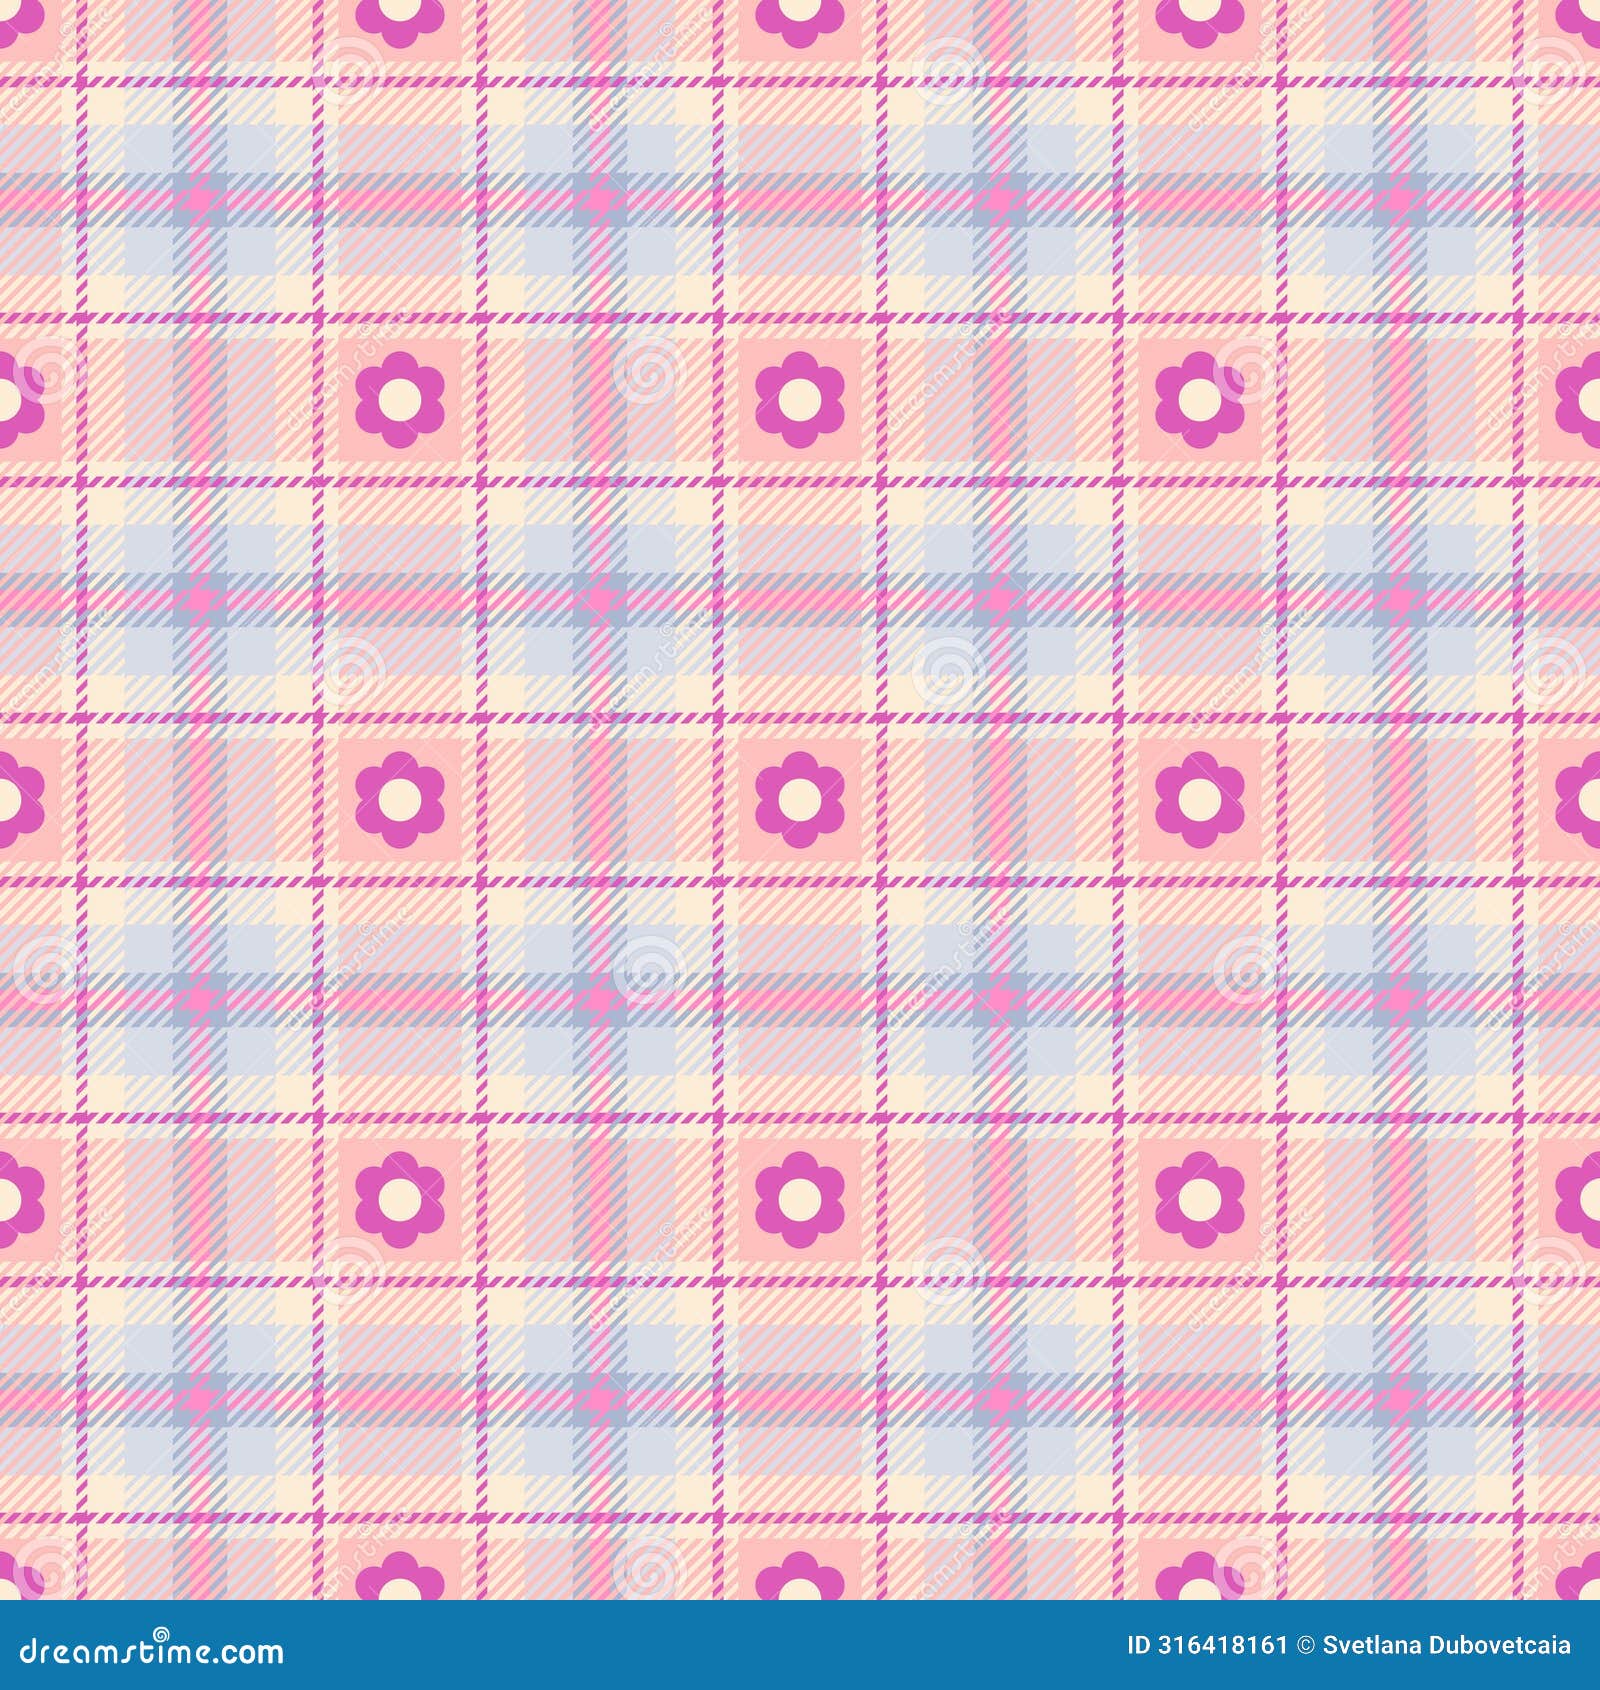 plaid seamless pattern. check pink color. repeating tartan checks . repeated scottish fall flannel. madras fabric prints